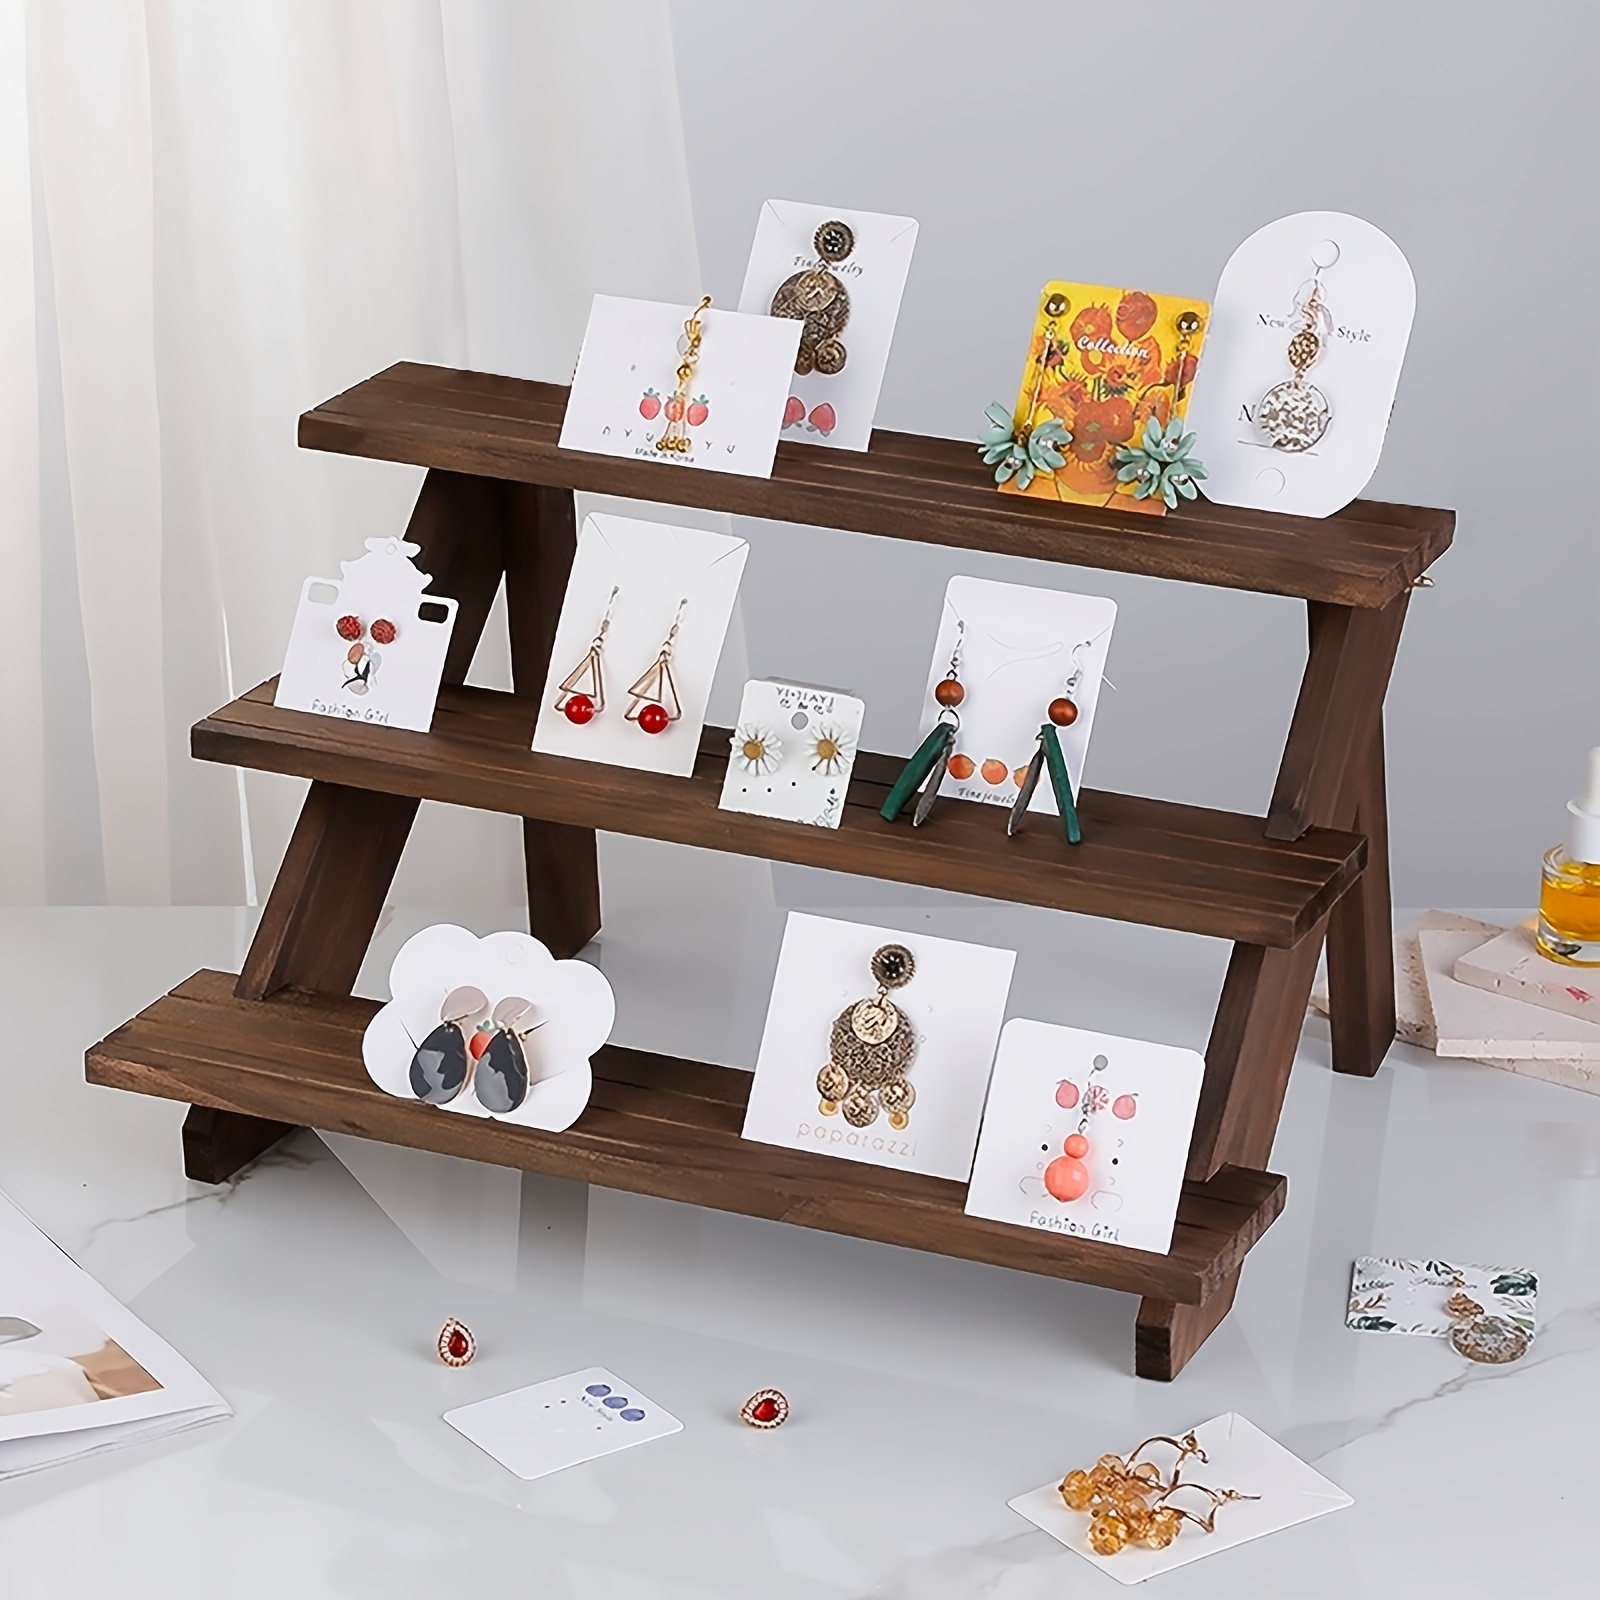 Wooden Retail Displays - 3 Tier Wooden Display Stand Table top